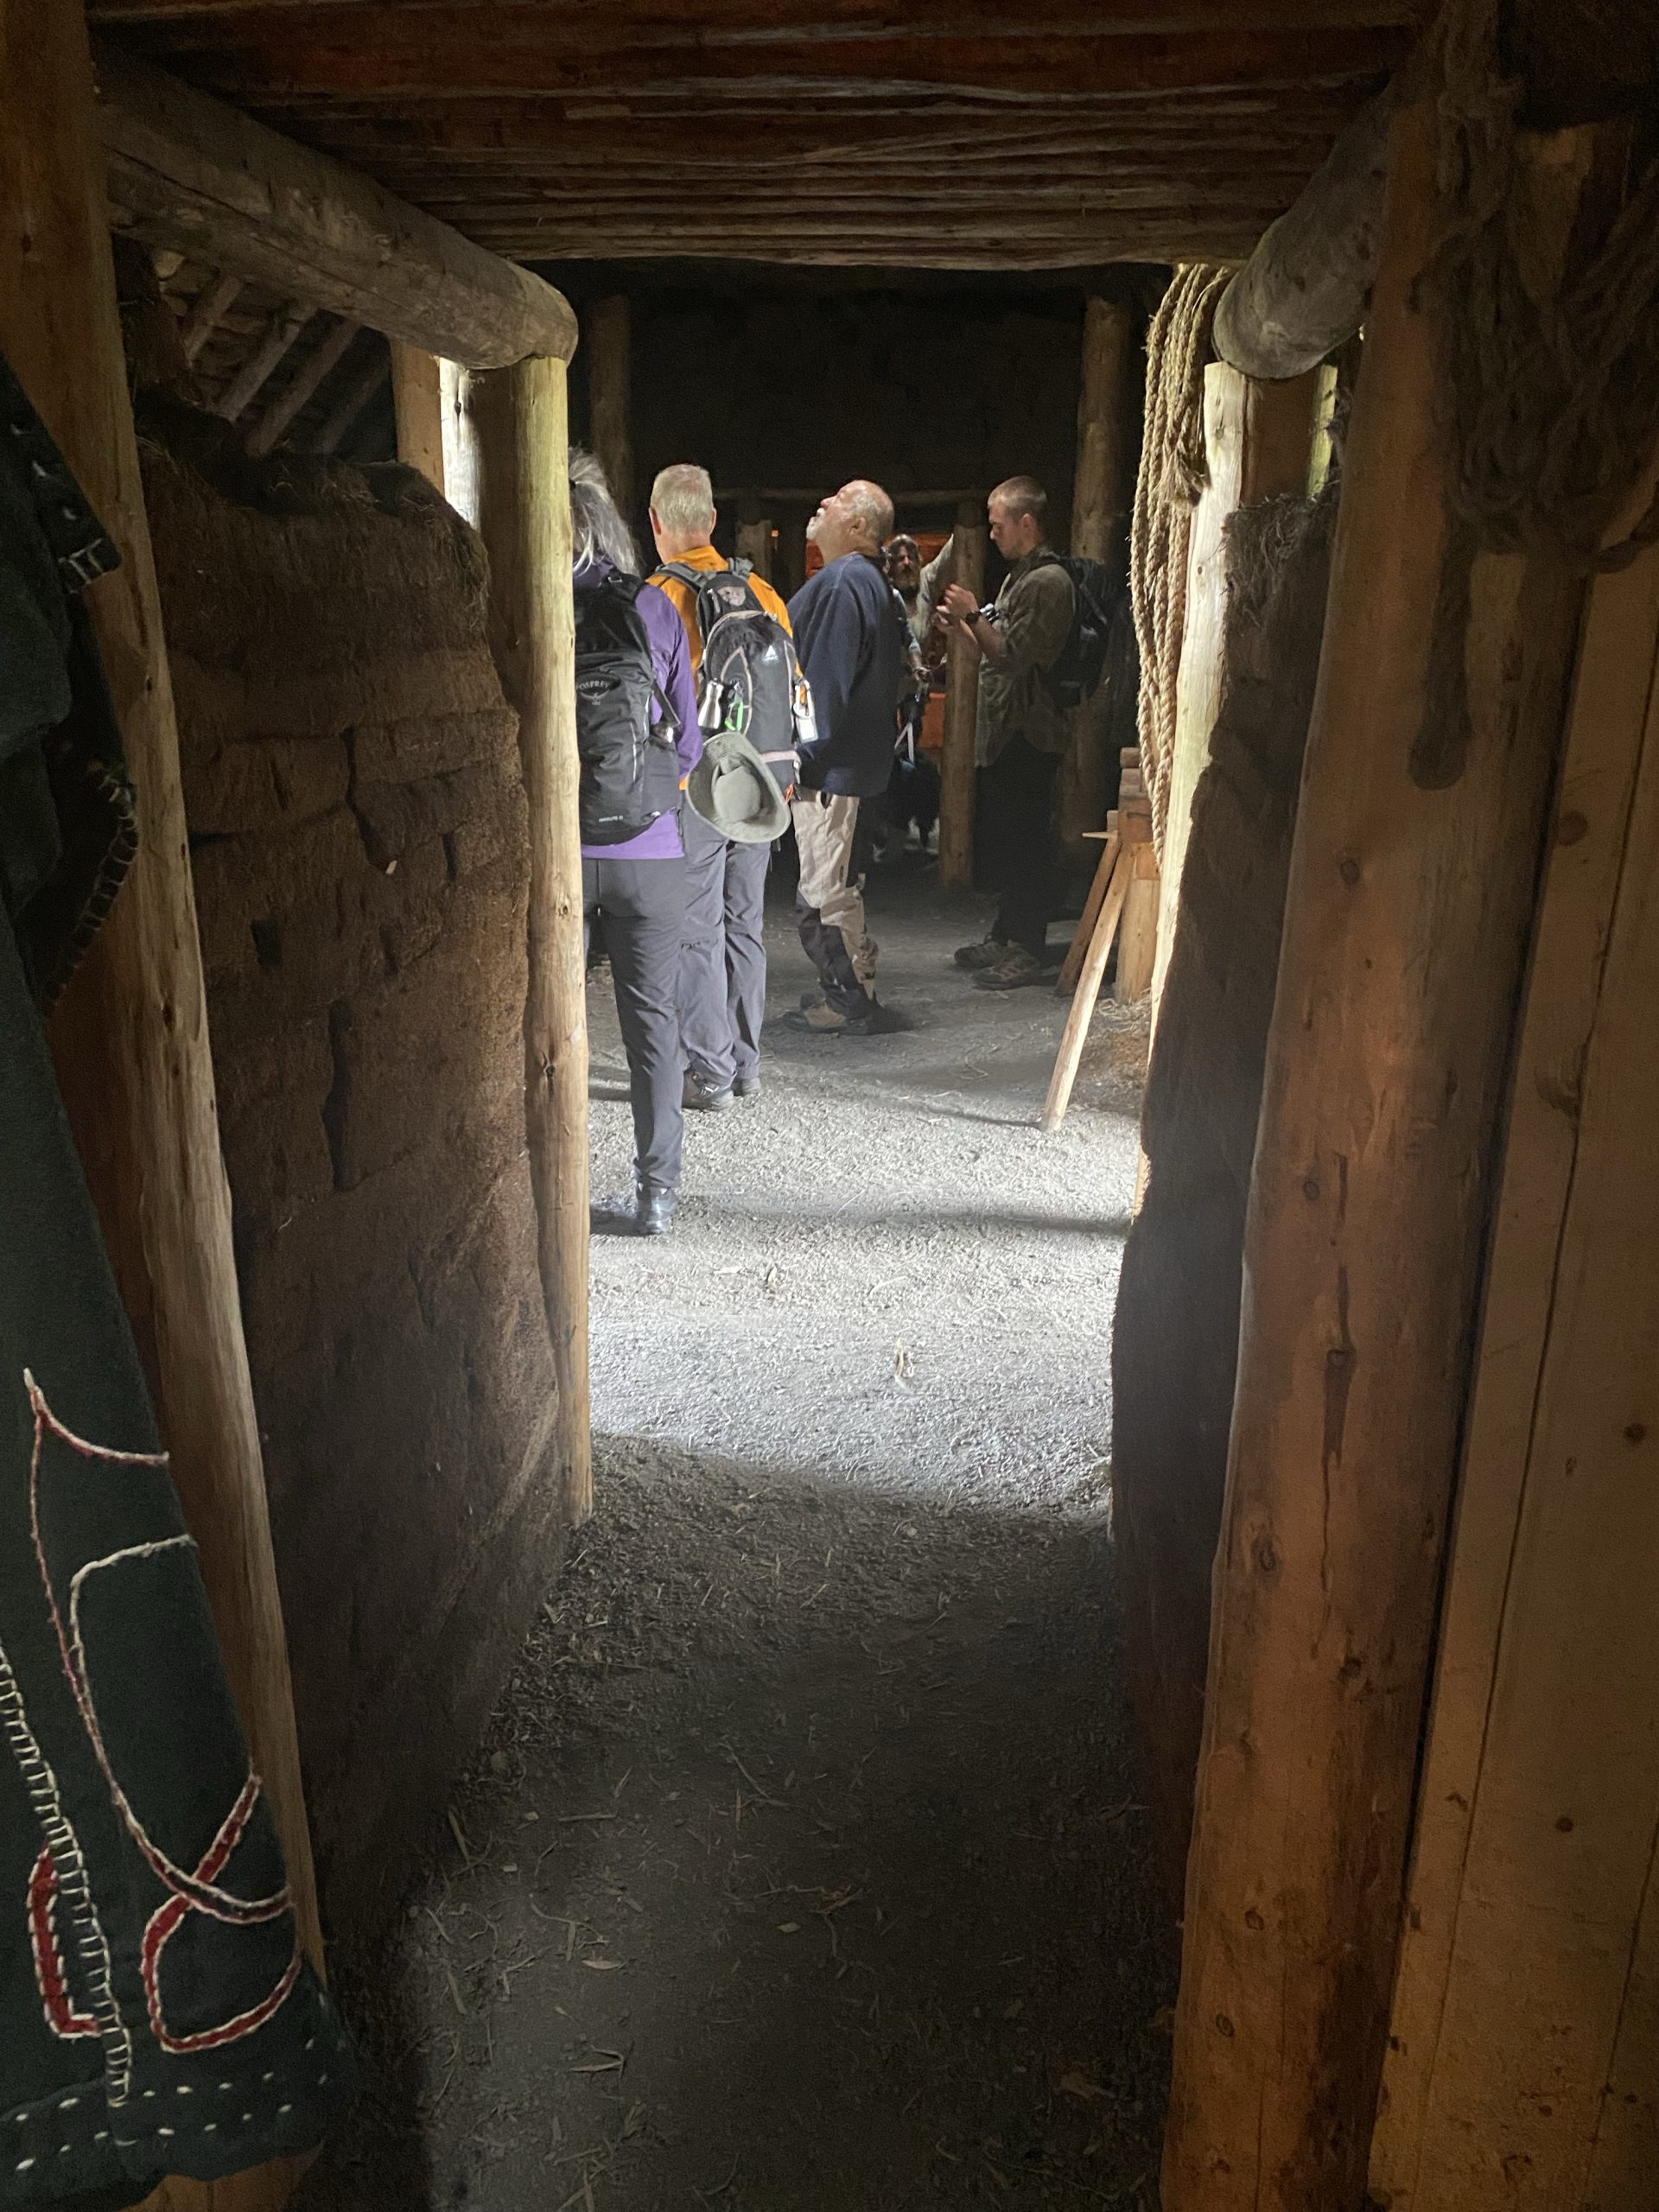 An interior doorway between rooms in a re-created Norse sod house at L’Anse aux Meadows.